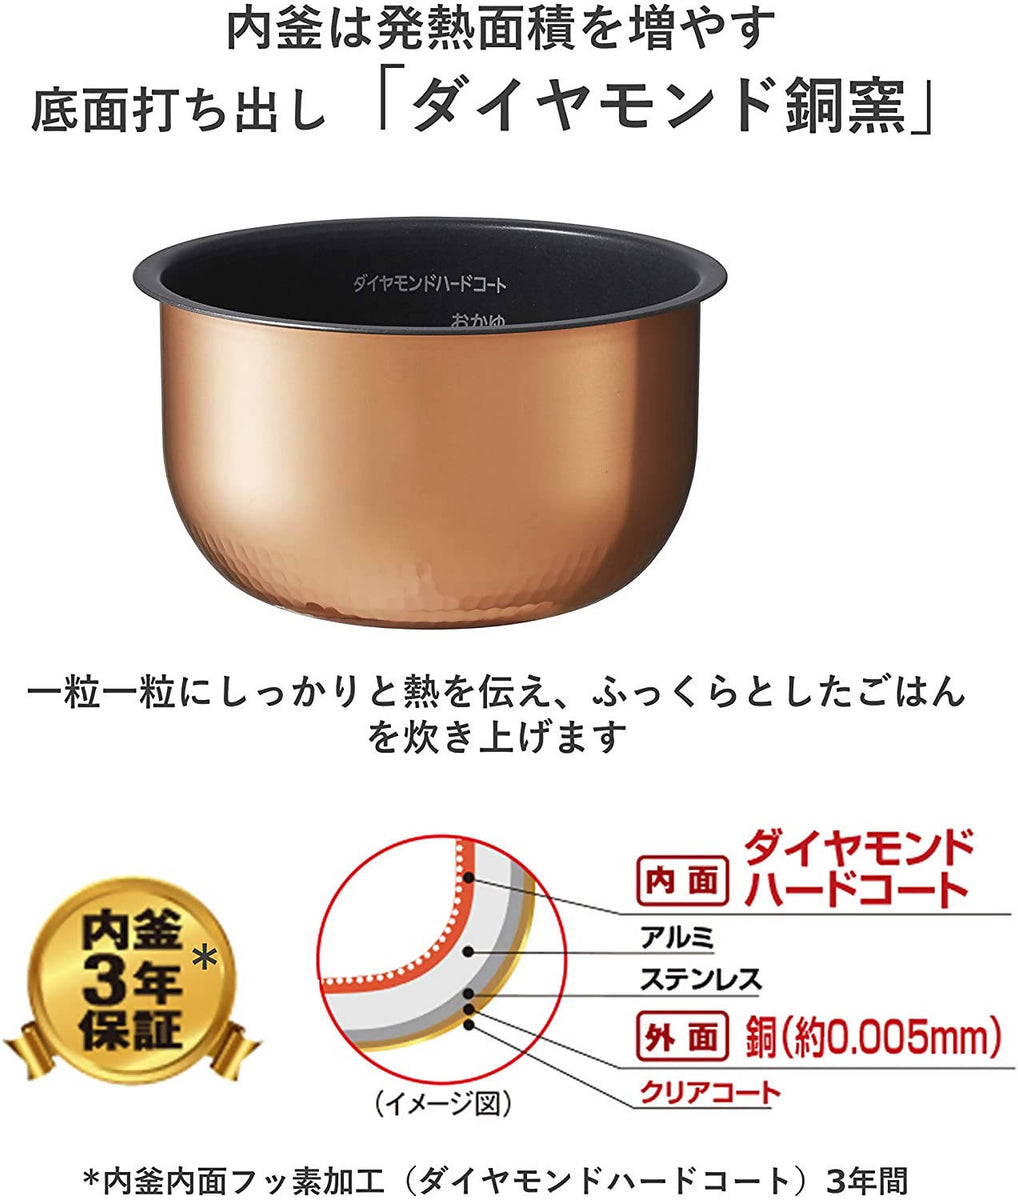 Panasonic SR FD T 2 Stage IH Induction Heating Rice Cooker